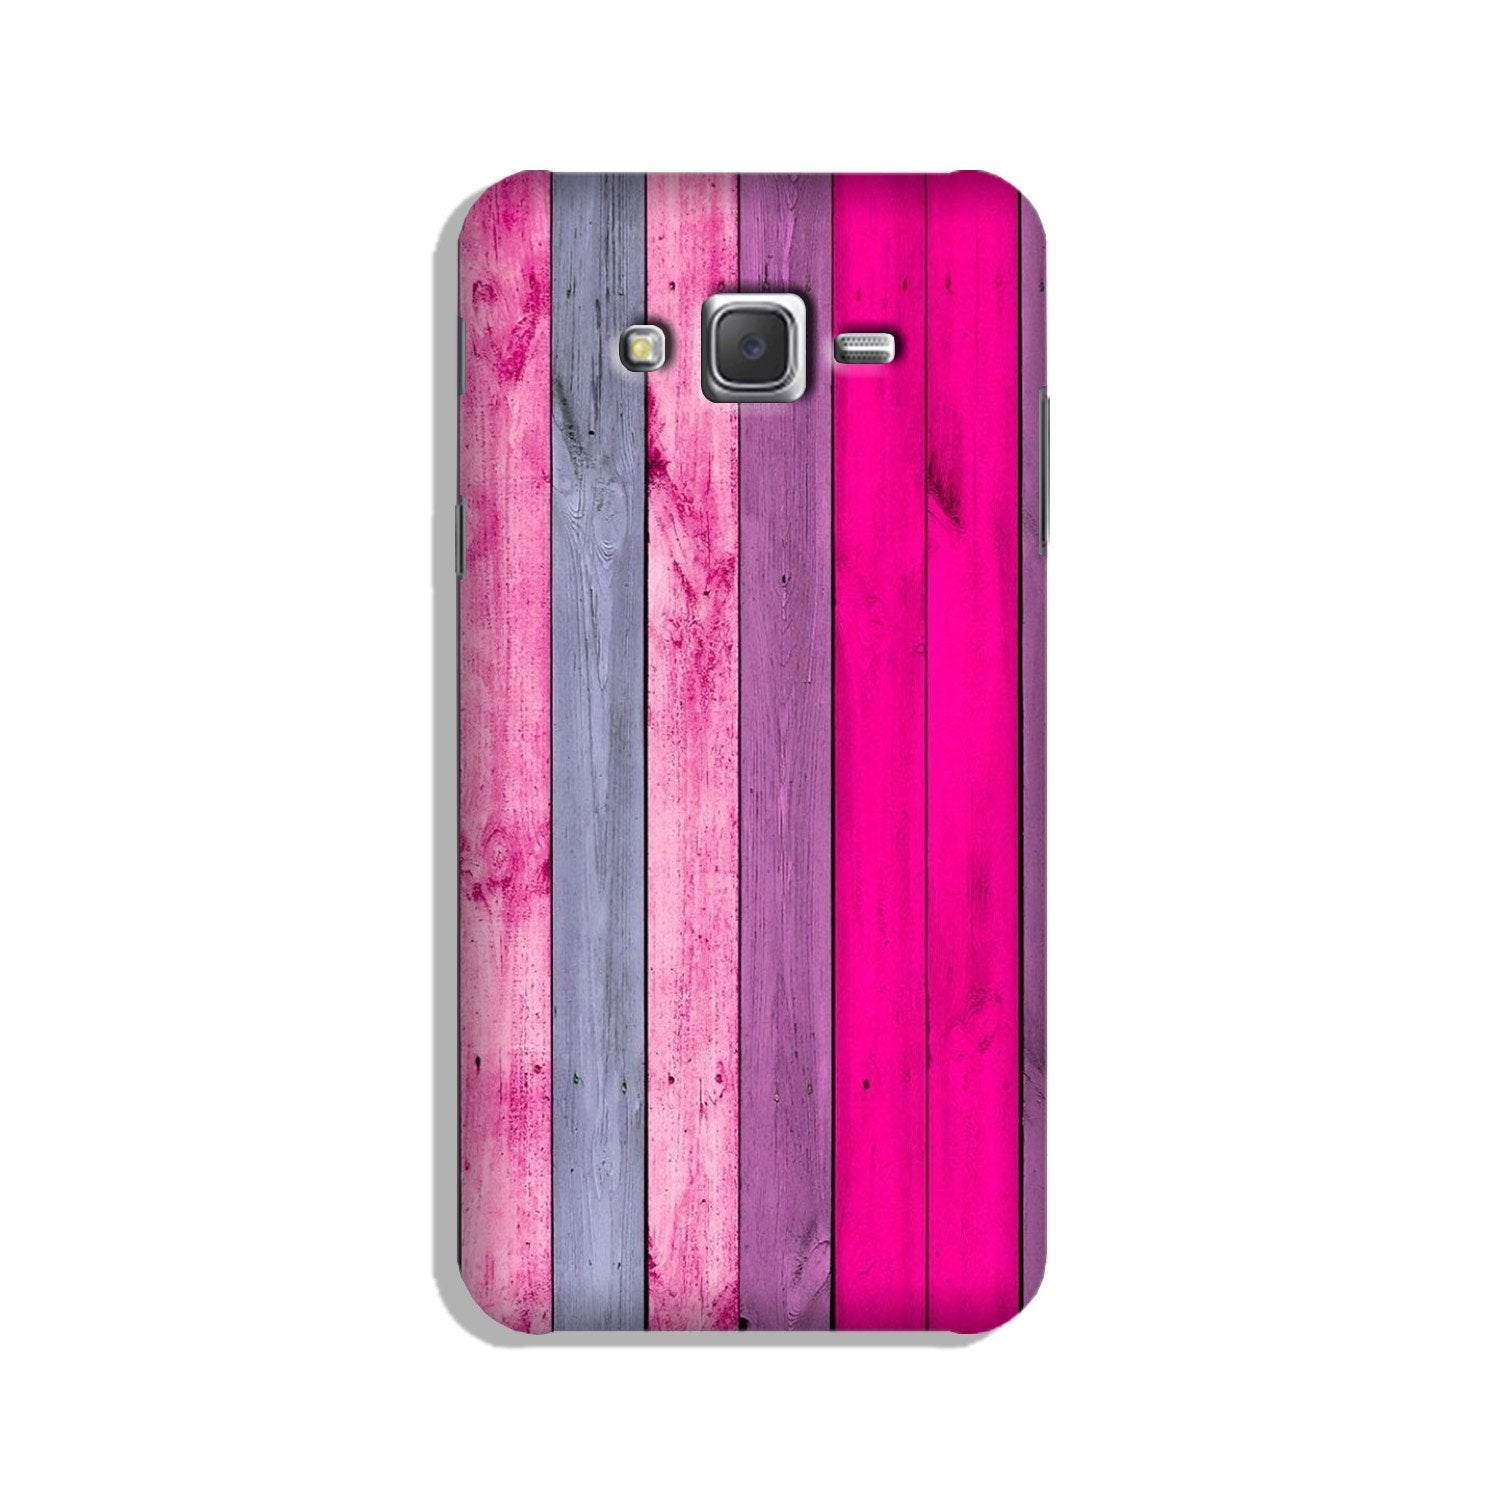 Wooden look Case for Galaxy J3 (2015)